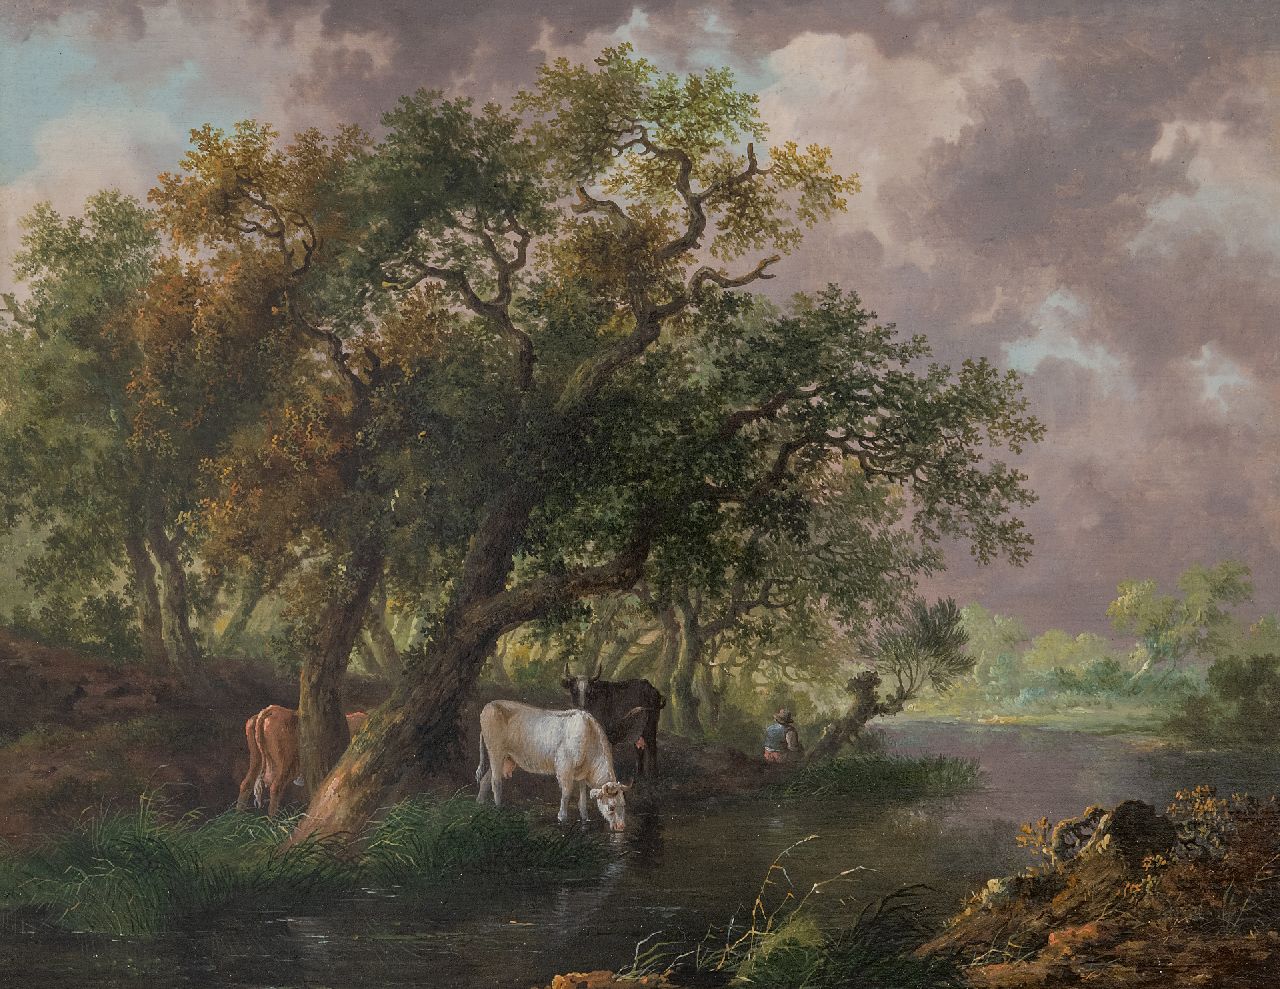 Renard F.T.  | Fredericus Theodorus Renard | Paintings offered for sale | Cattle watering by a wooded river, oil on panel 26.5 x 34.3 cm, signed (vague) on a label on the reverse and painted ca. 1815, without frame